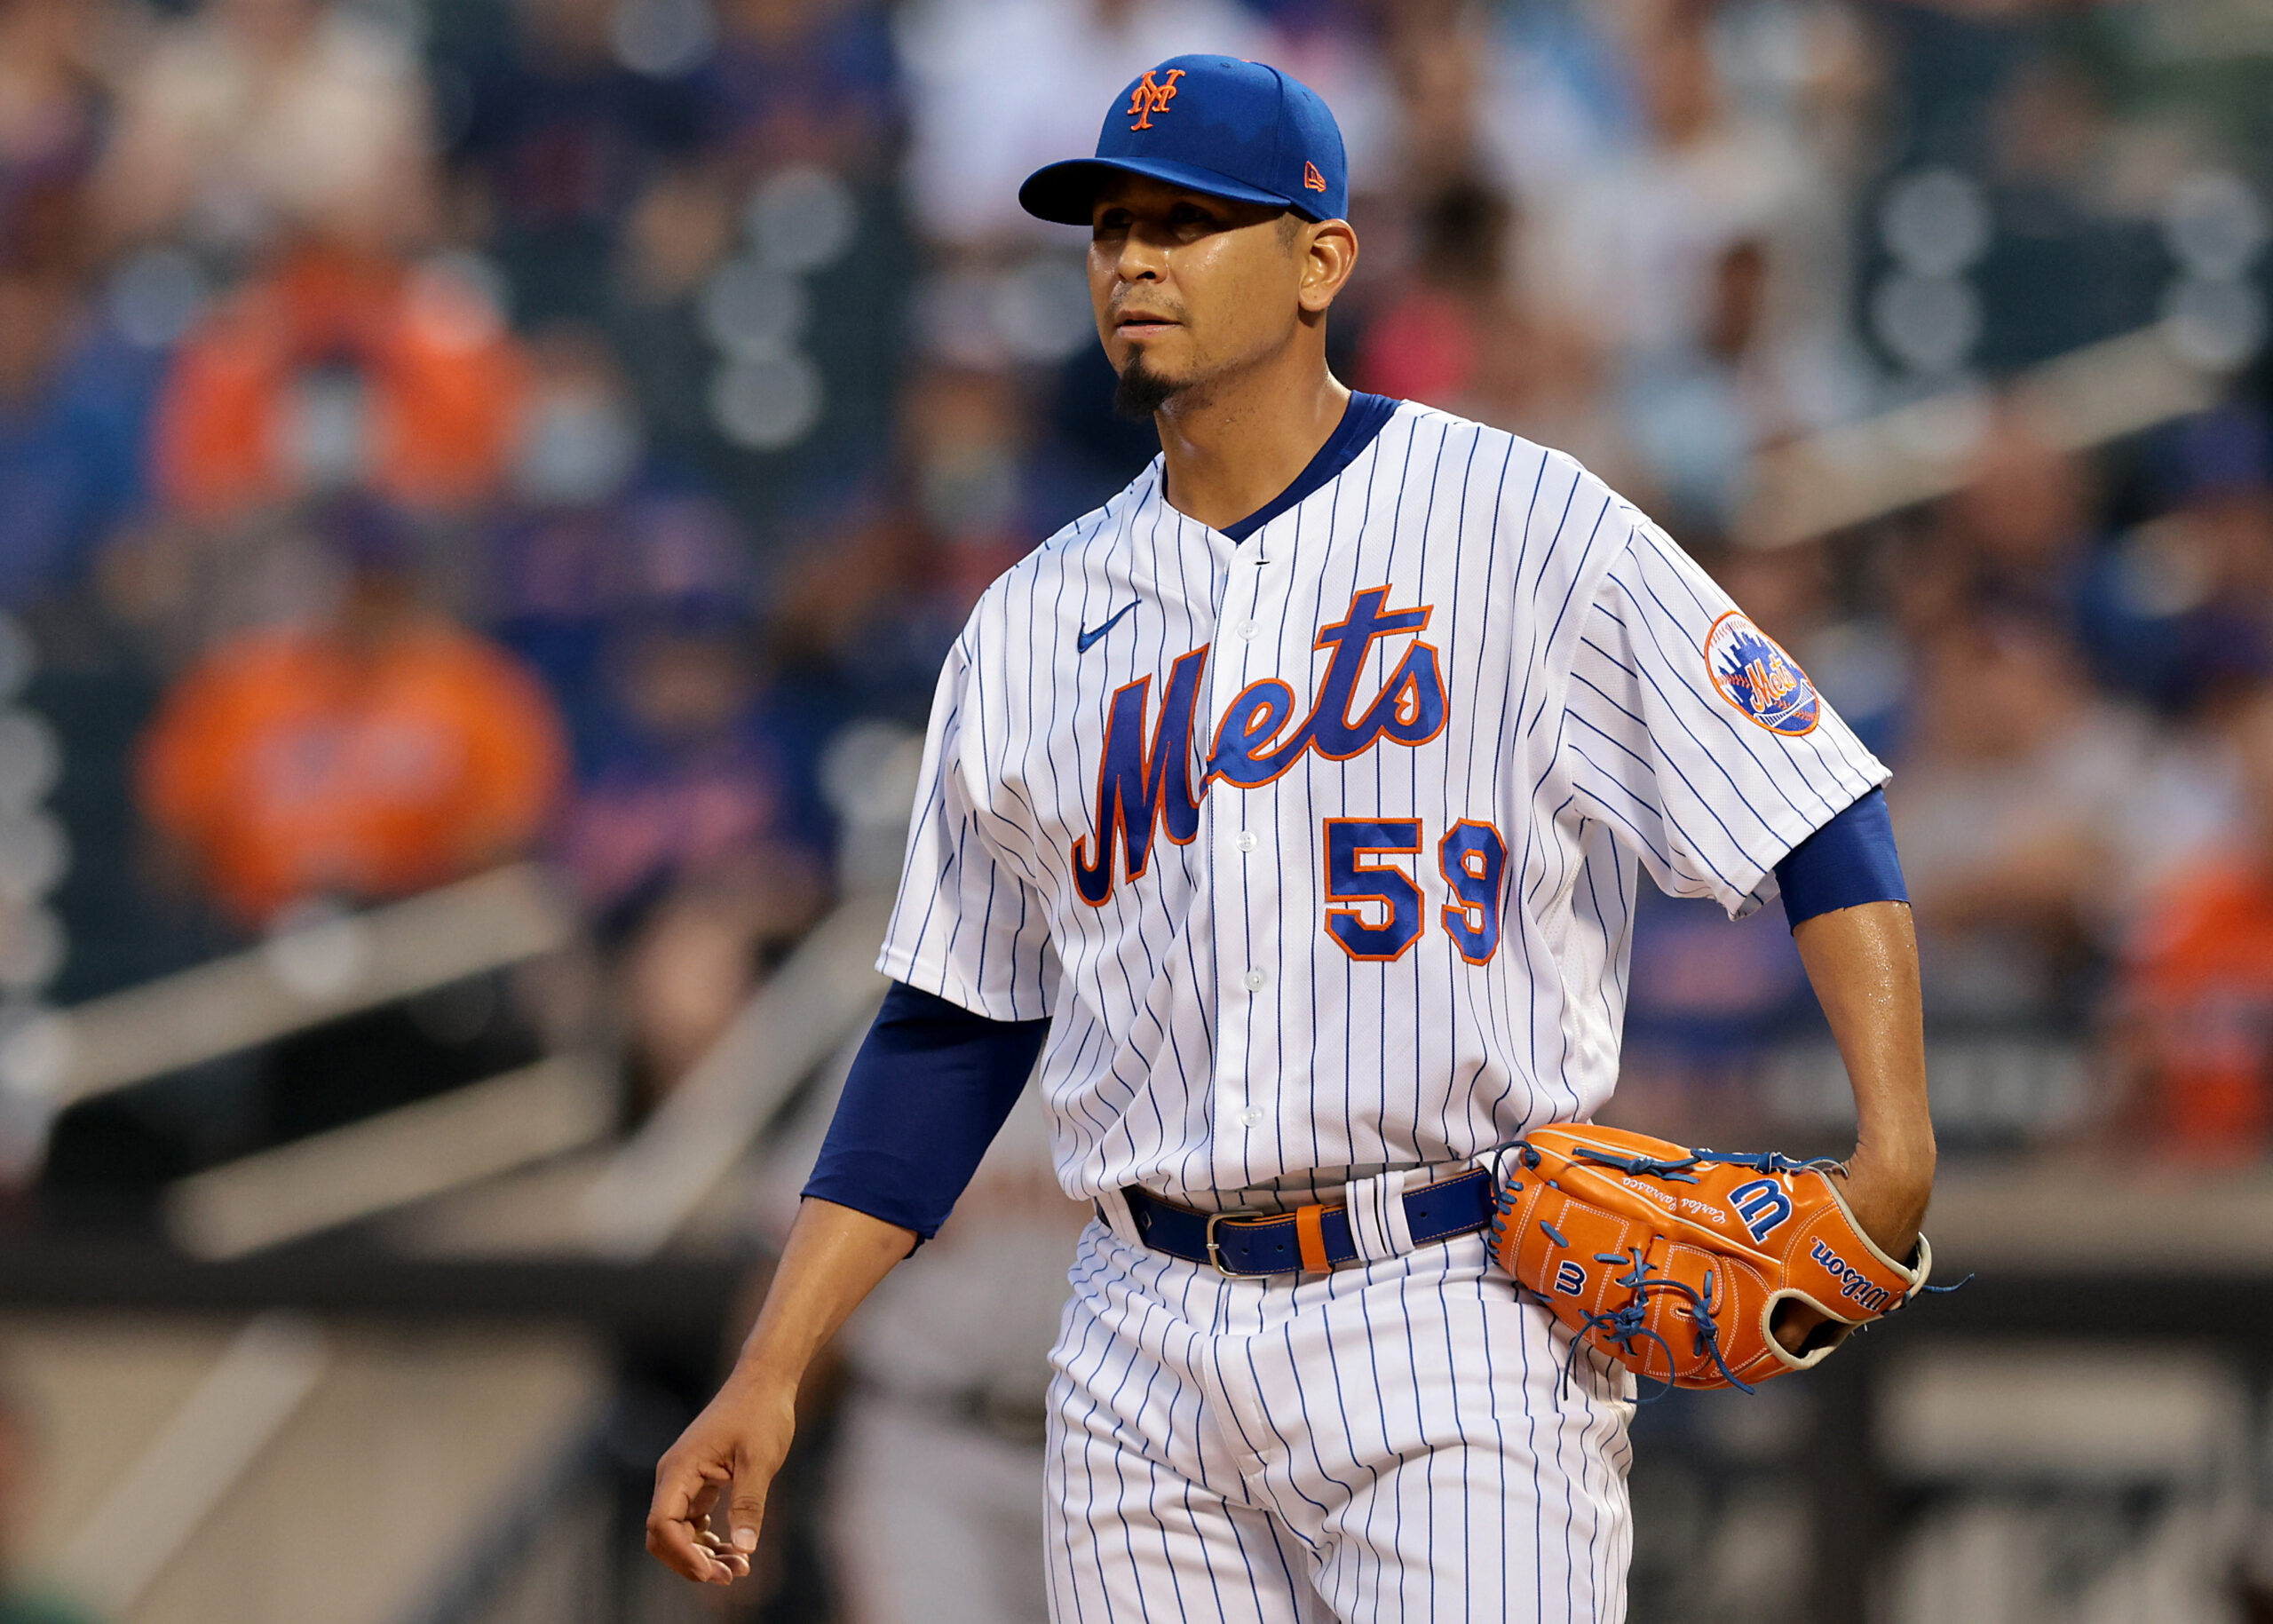 Mets Get Swept Out of Milwaukee with 8-4 Loss